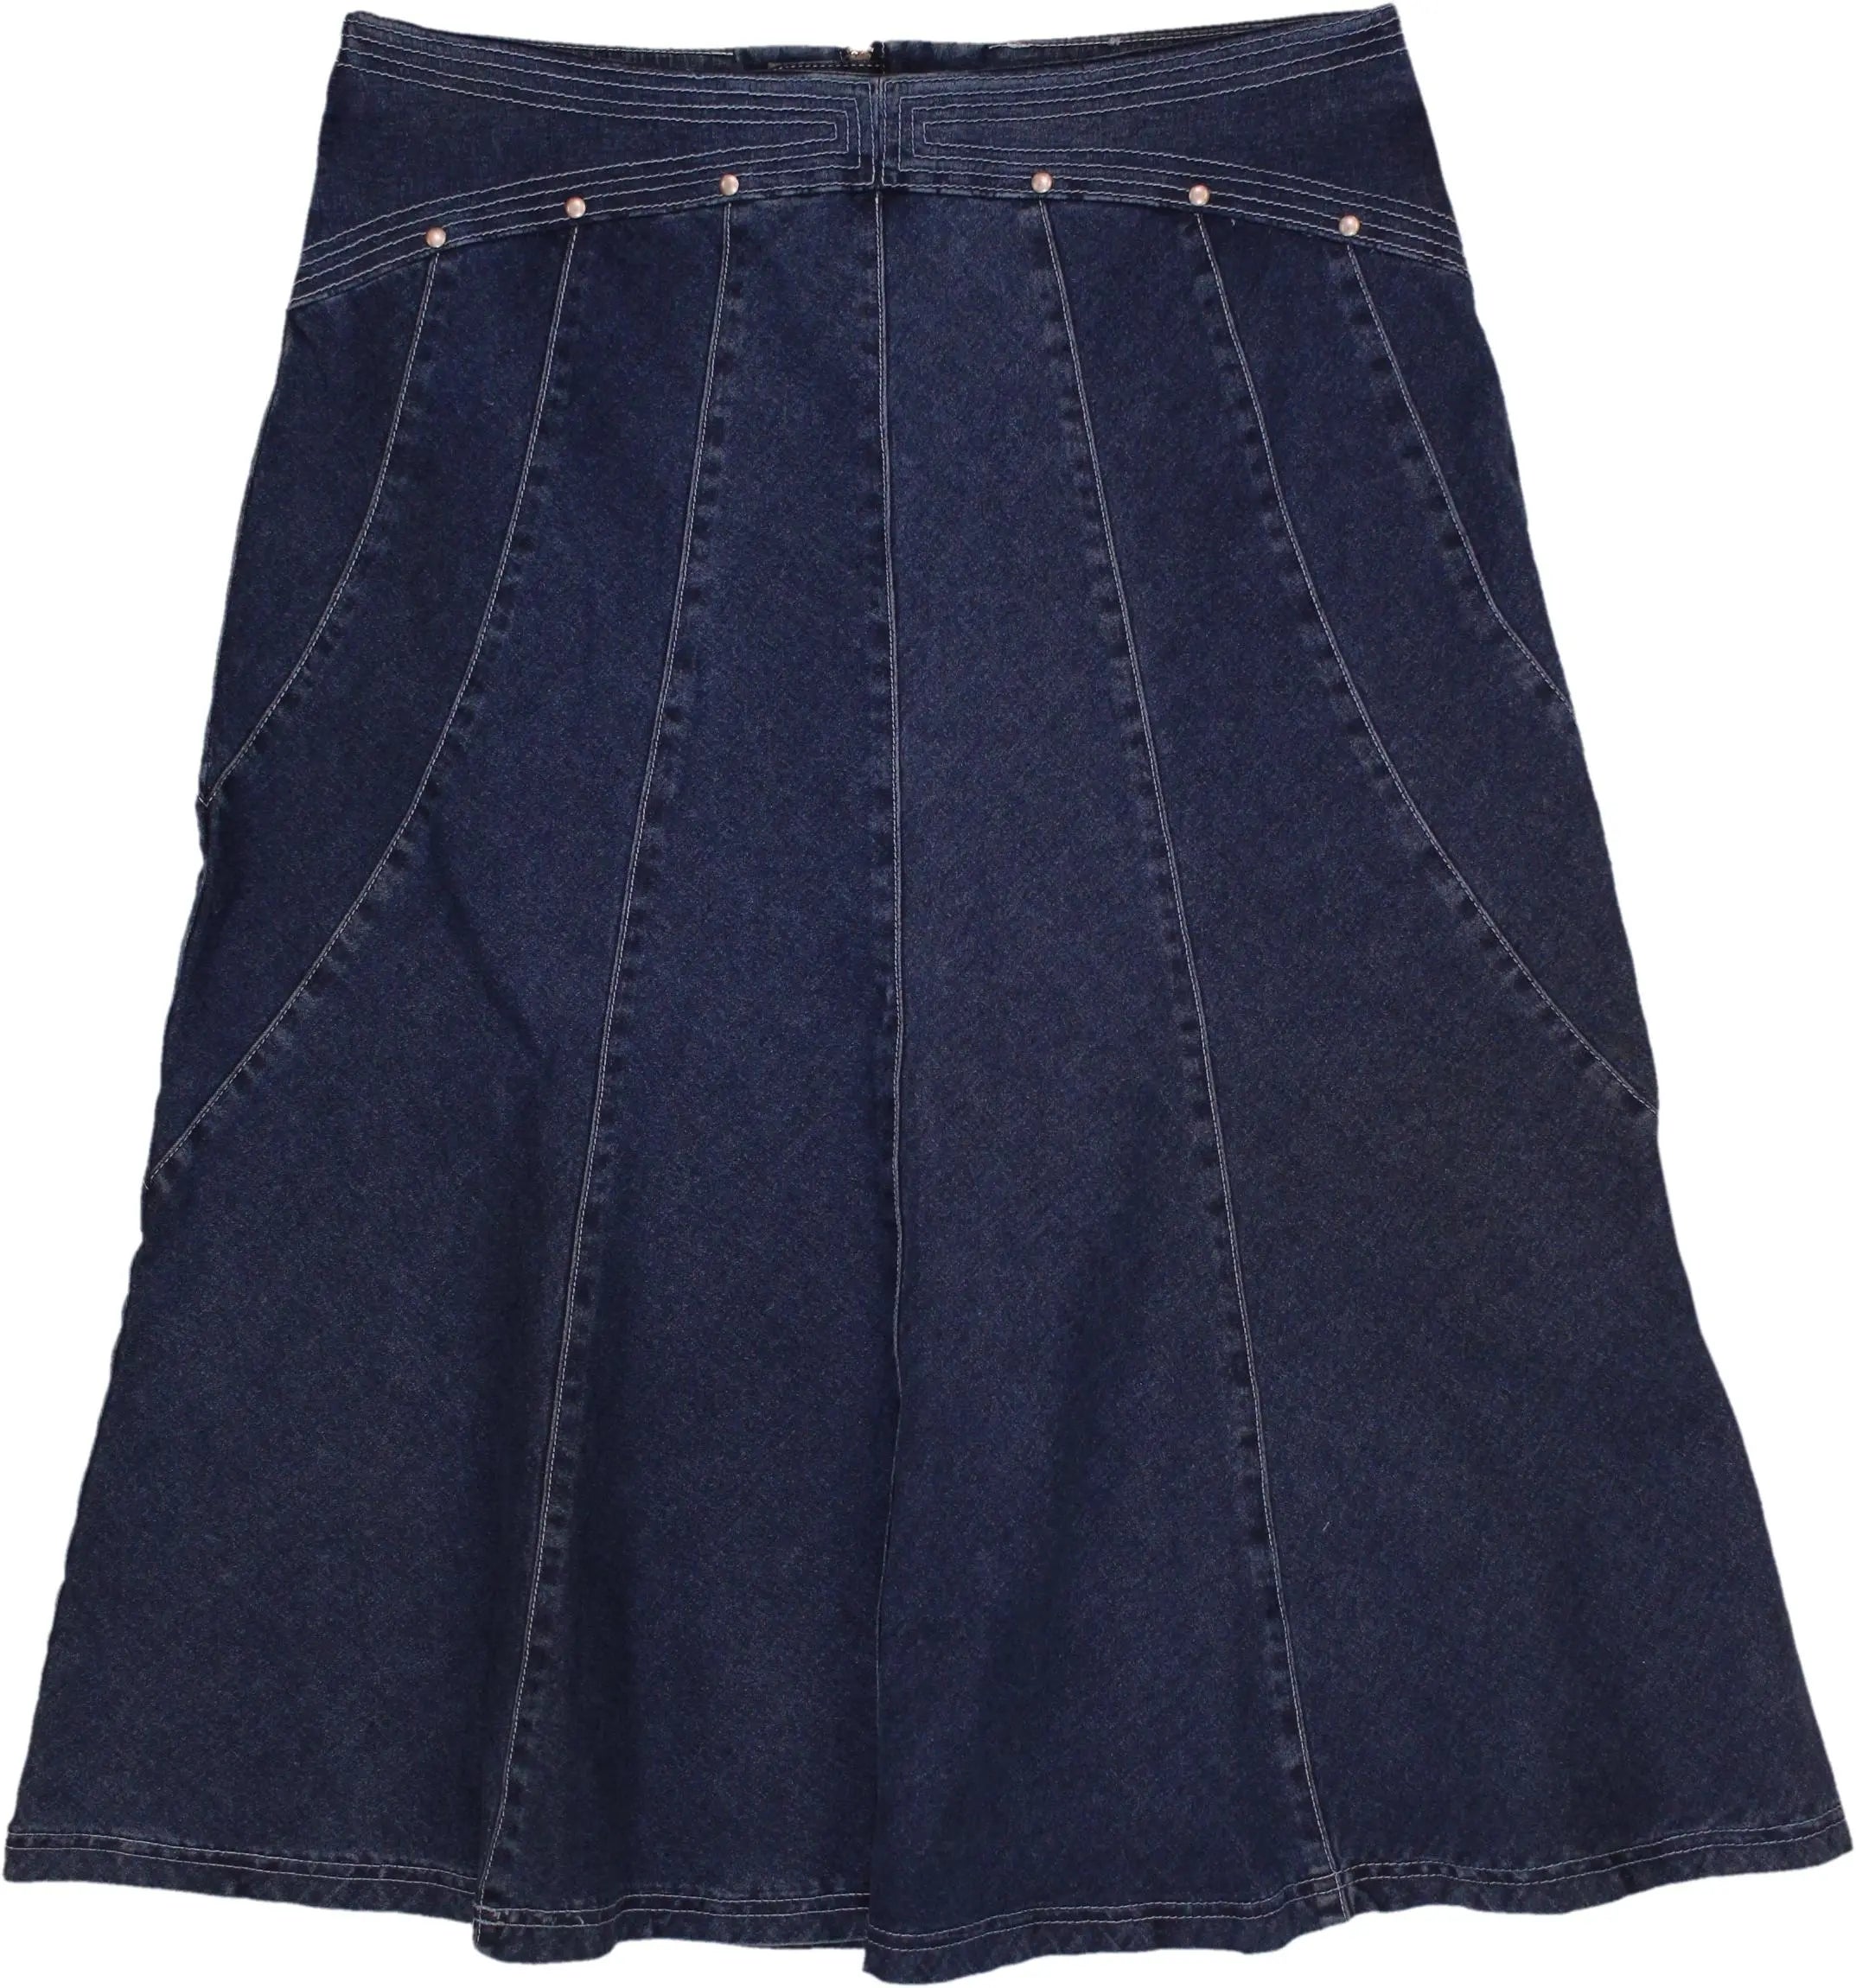 Unknown - Denim Skirt- ThriftTale.com - Vintage and second handclothing